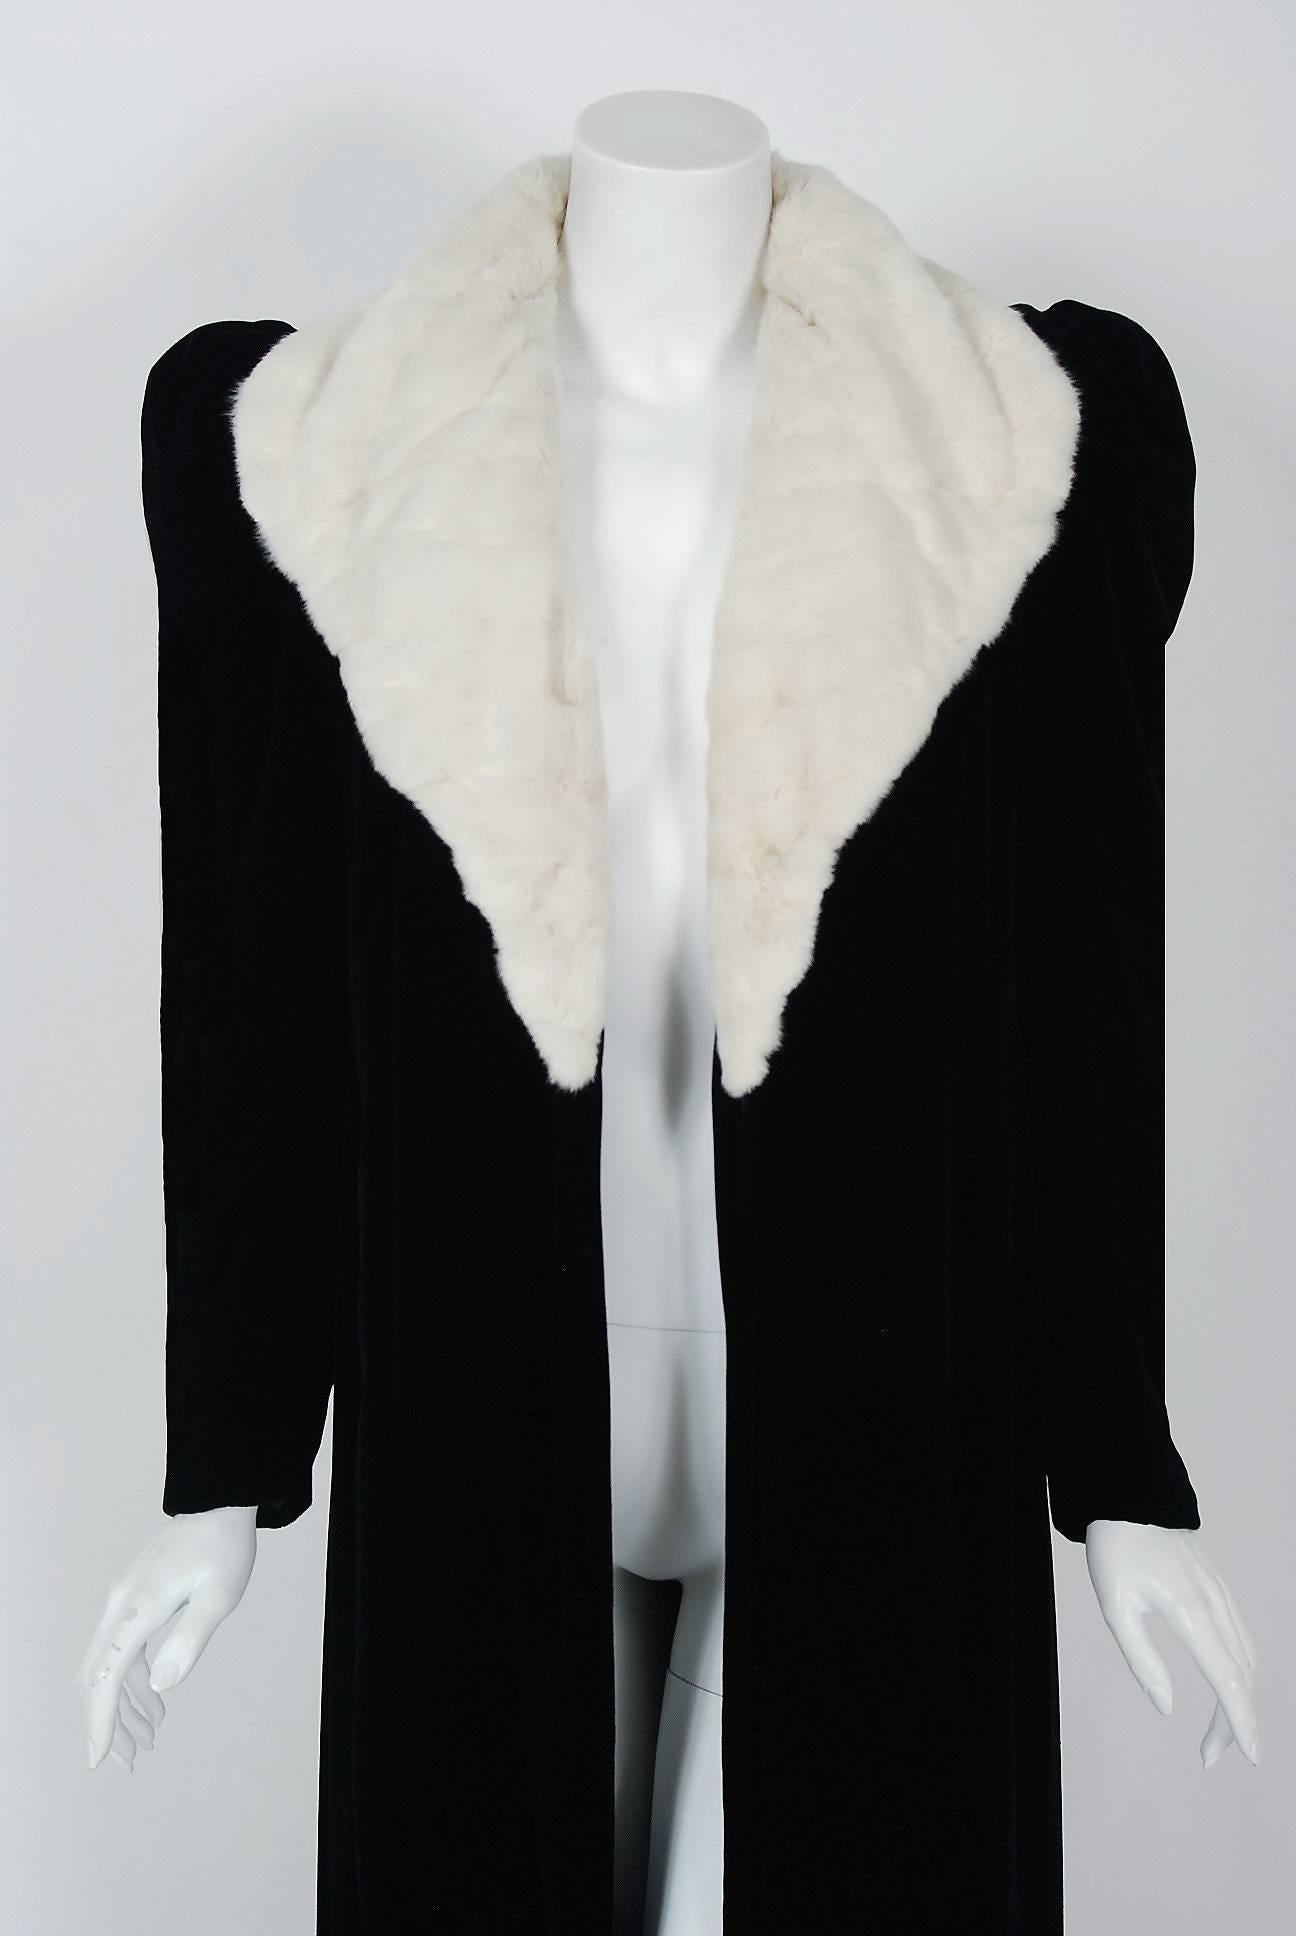 This exquisite late 1930's I.Magnin Import Couture ermine-fur and silk-velvet coat will make any woman shine during cold winter months. The soft white fur has been worked into a deco stripe pattern and the effect is really breathtaking. The care to